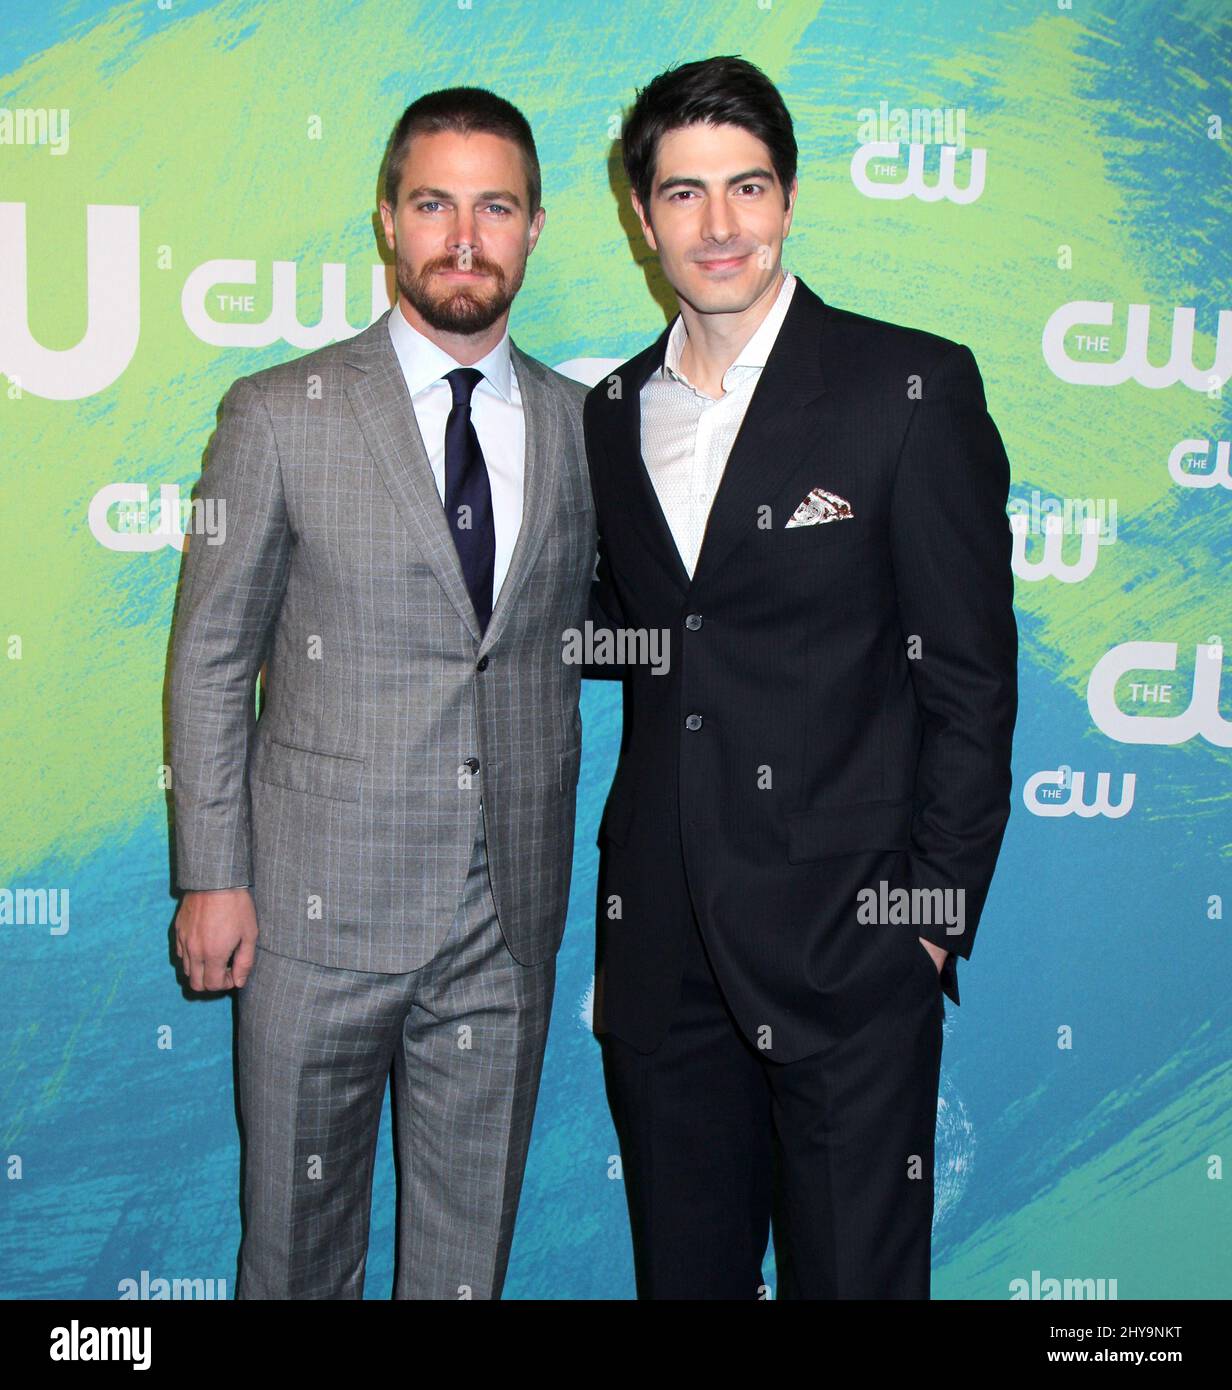 Stephen Amell And Brandon Routh Attending The Cw Networks 2016 Upfront